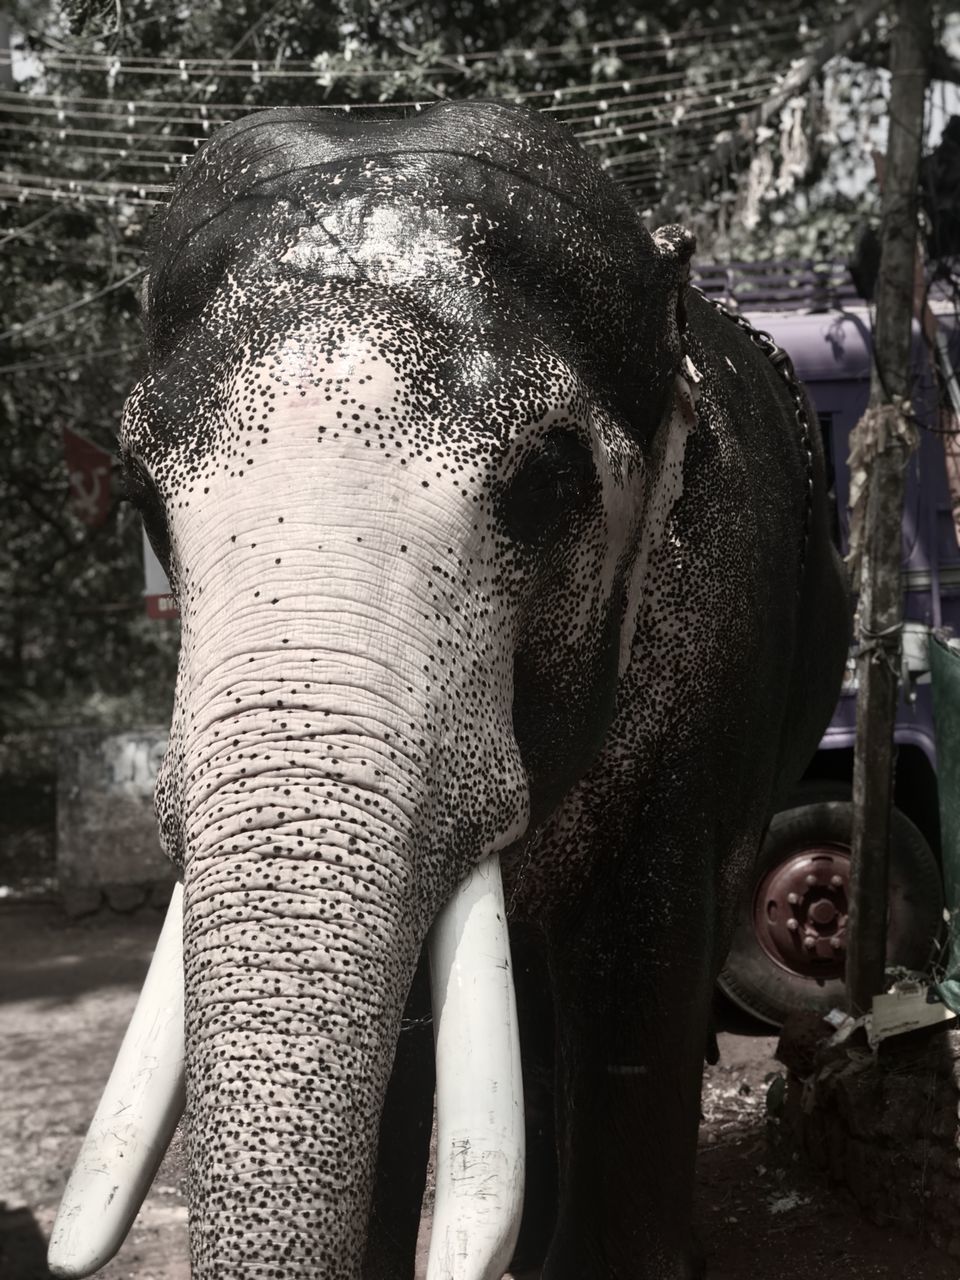 CLOSE-UP OF ELEPHANT IN LAKE